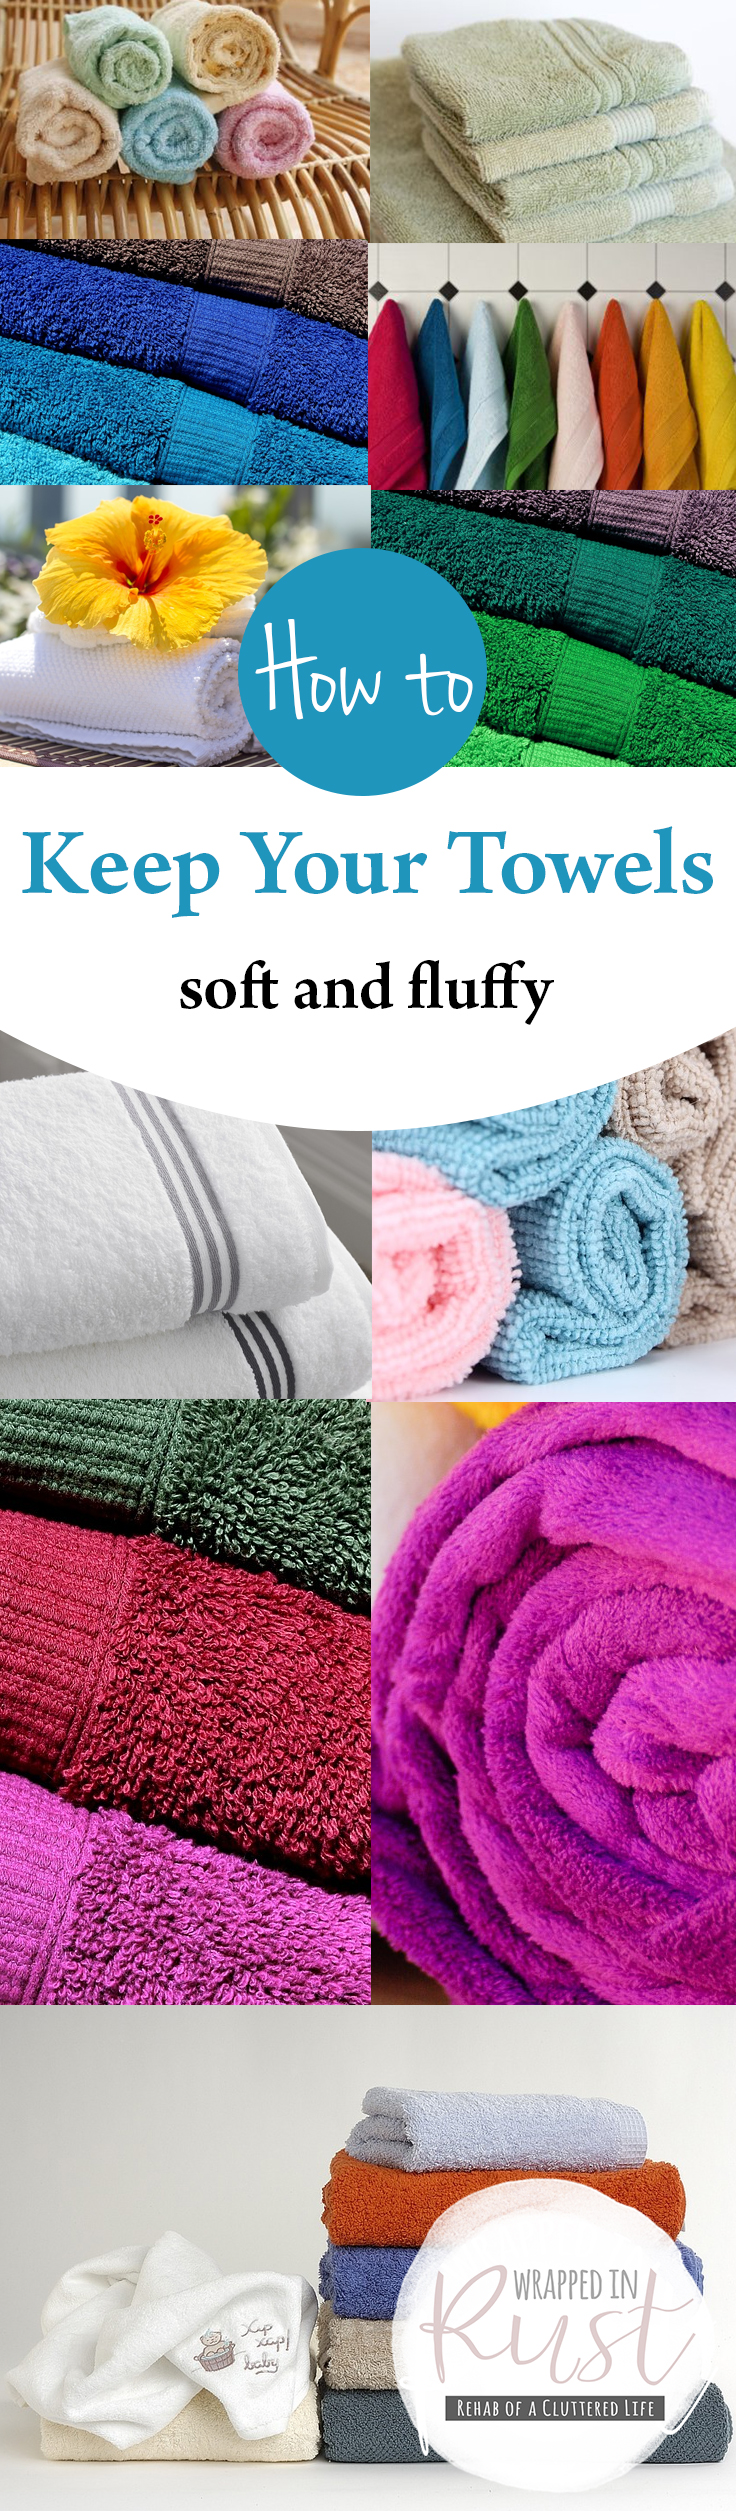 How to Keep Your Towels Soft and Fluffy| Towel Care, Bathroom Towel Care, Bathroom Care, How to Make Towels Fluffy, Easy Towel Care, Laundry, Laundry Hacks #Laundry #BathroomCare #TowelCare